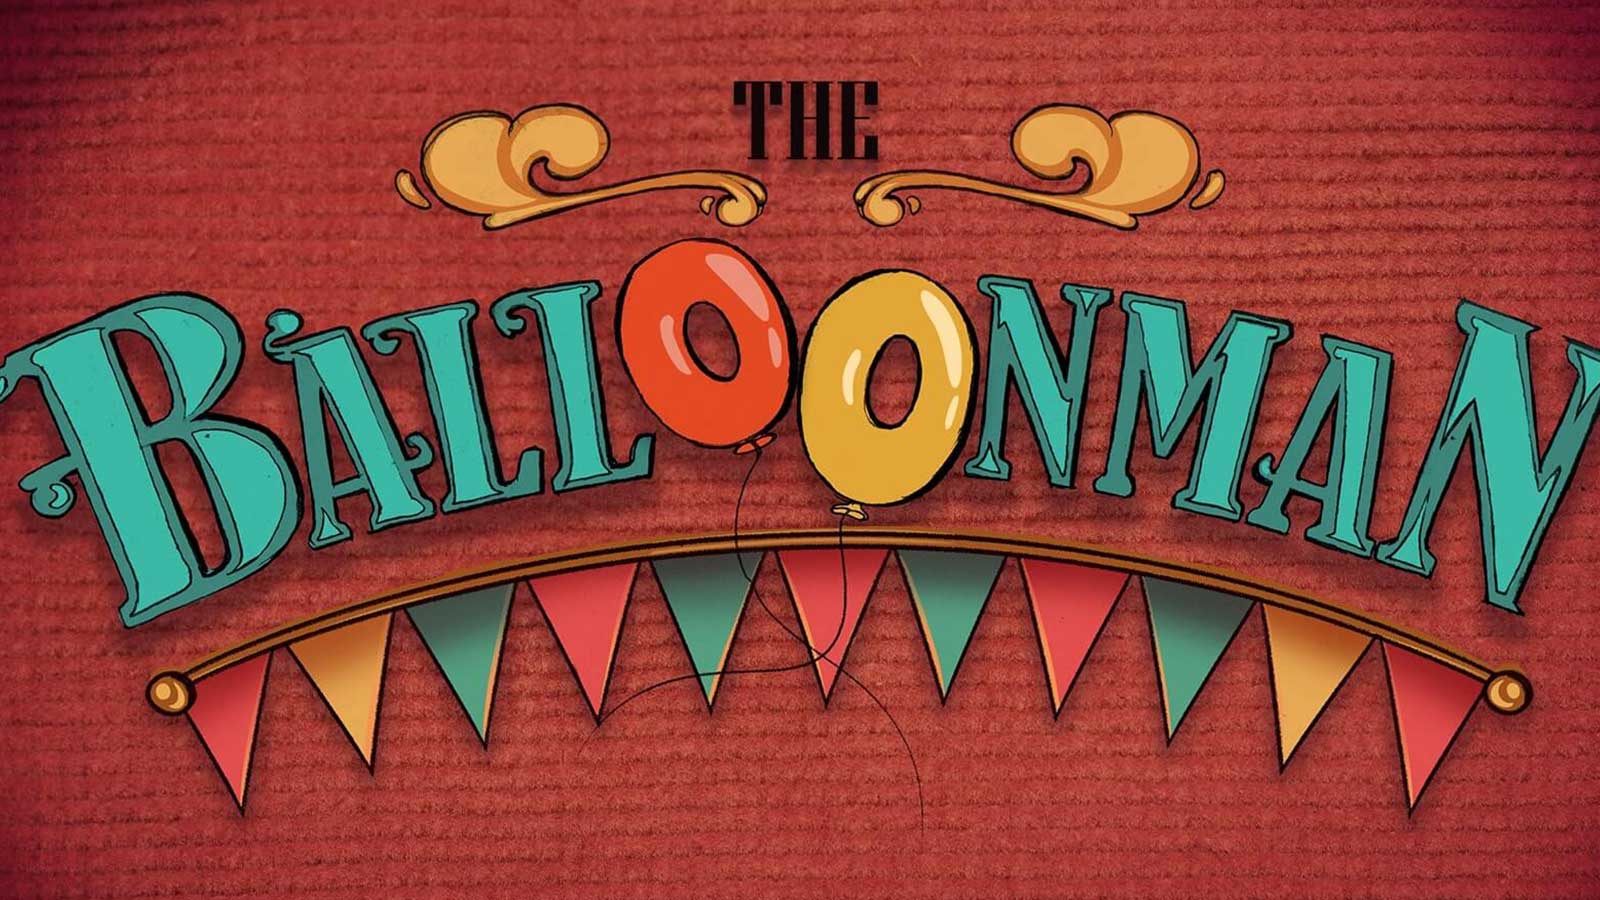 The title card for the animation The Balloonman